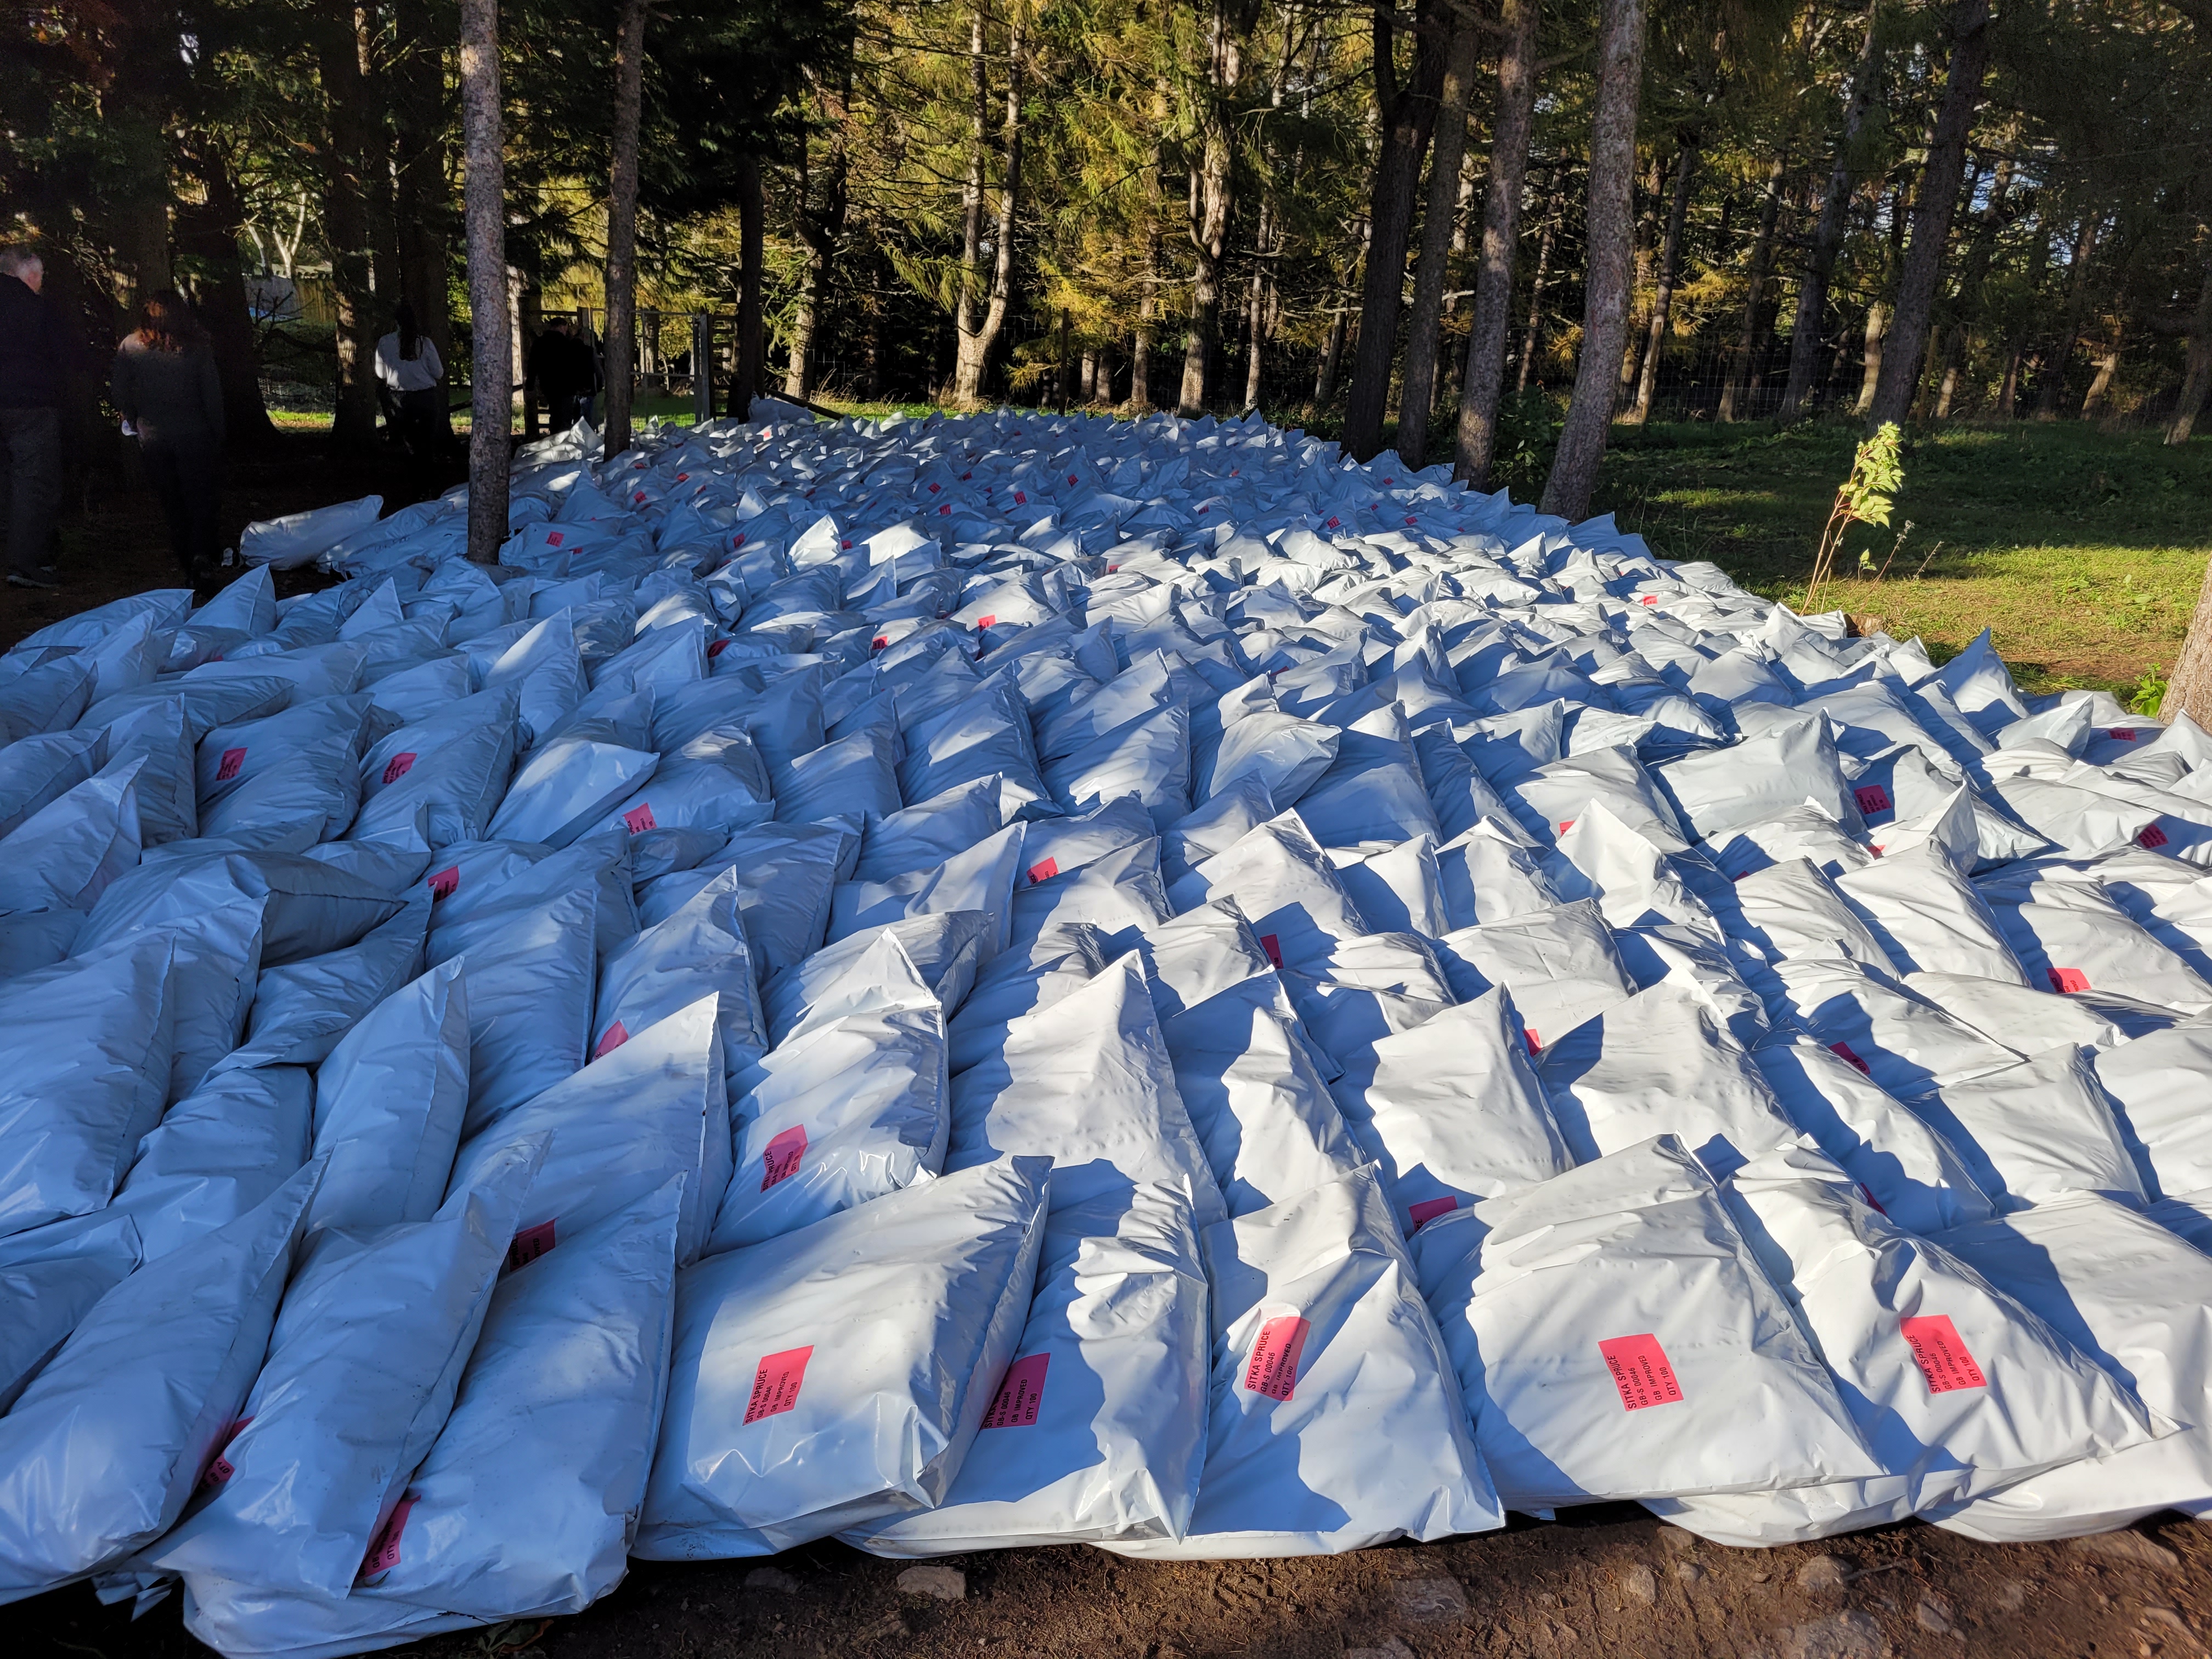 Lots of large white sacks placed on the ground.